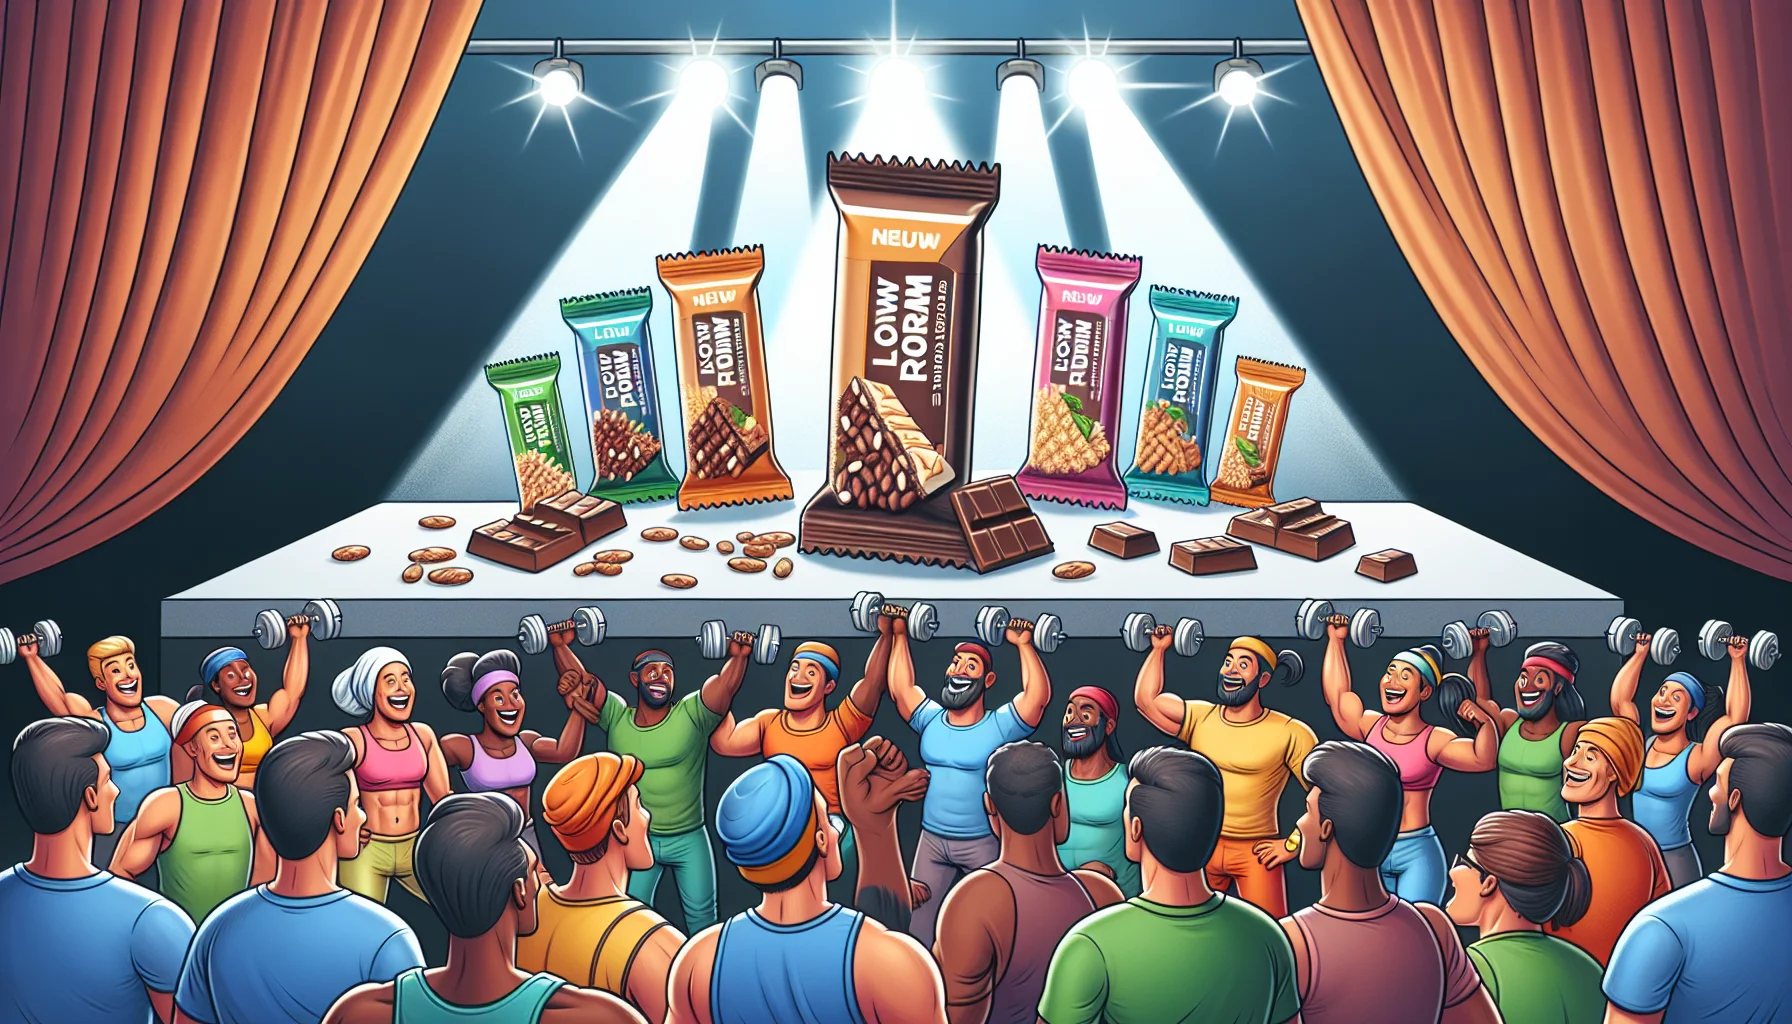 Illustrate a comical scene where a collection of low fodmap protein bars are being presented like superstars on a stage with a shiny spotlight shining down on each of them. Audience consisting of a diverse group of people, displaying South Asian, Caucasian, Hispanic, Black, Middle-Eastern, and East Asian descents with equal representation of both genders, cheer enthusiastically. They are all dressed in various sports attire, signifying their involvement in different sports. Some are even happy and excited, lifting dumbbells and practicing sports while watching the protein bars, underscoring the connection between these nutritional supplements and sports.